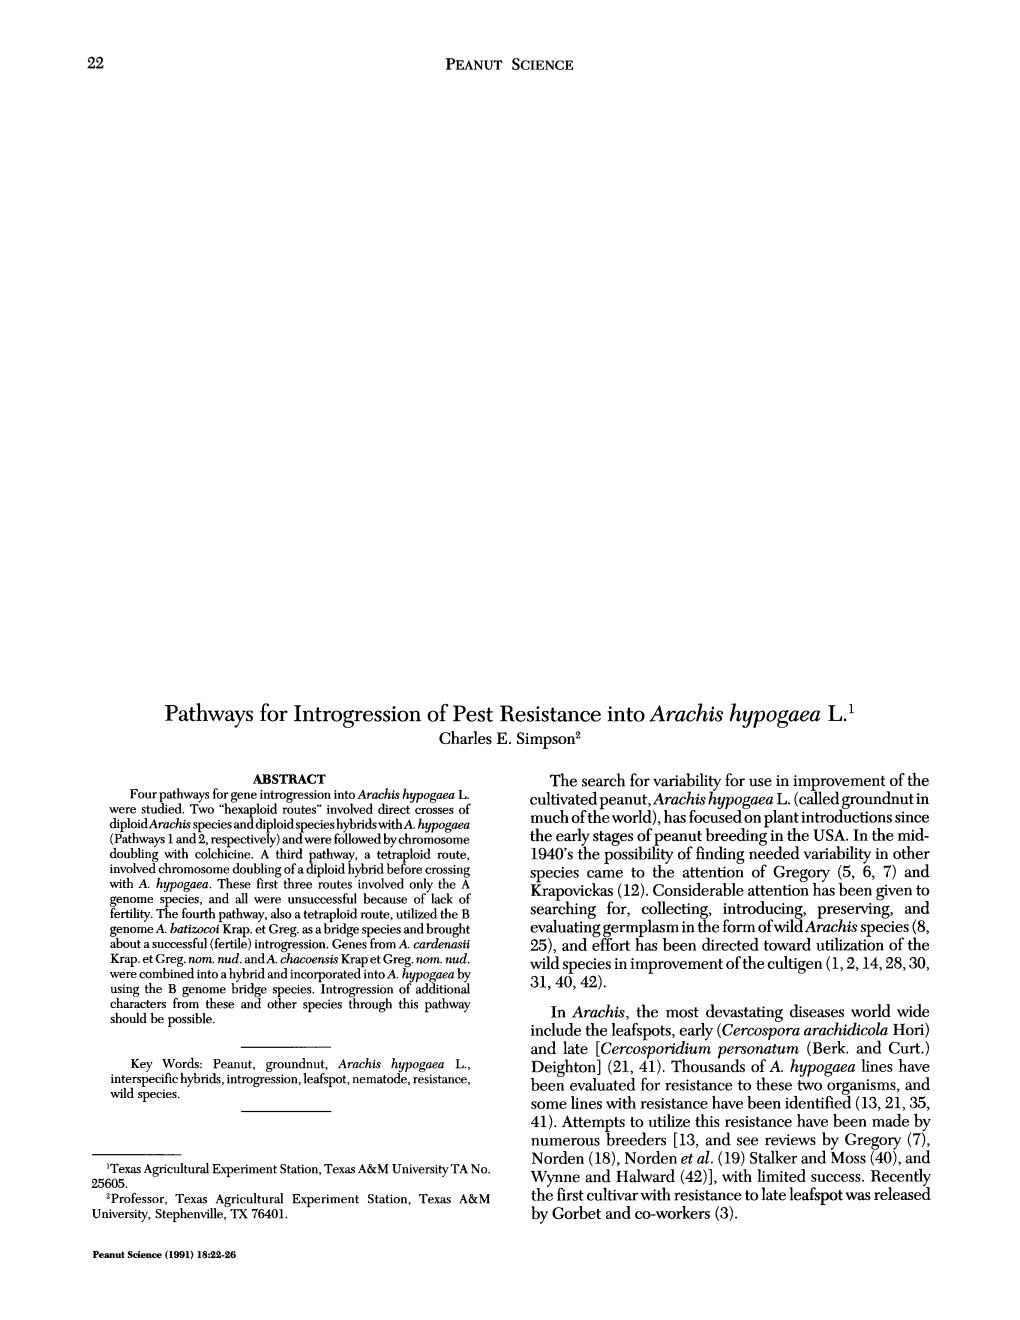 Pathways for Introgression of Pest Resistance Into Arachis Hypogaea L.' Charles E